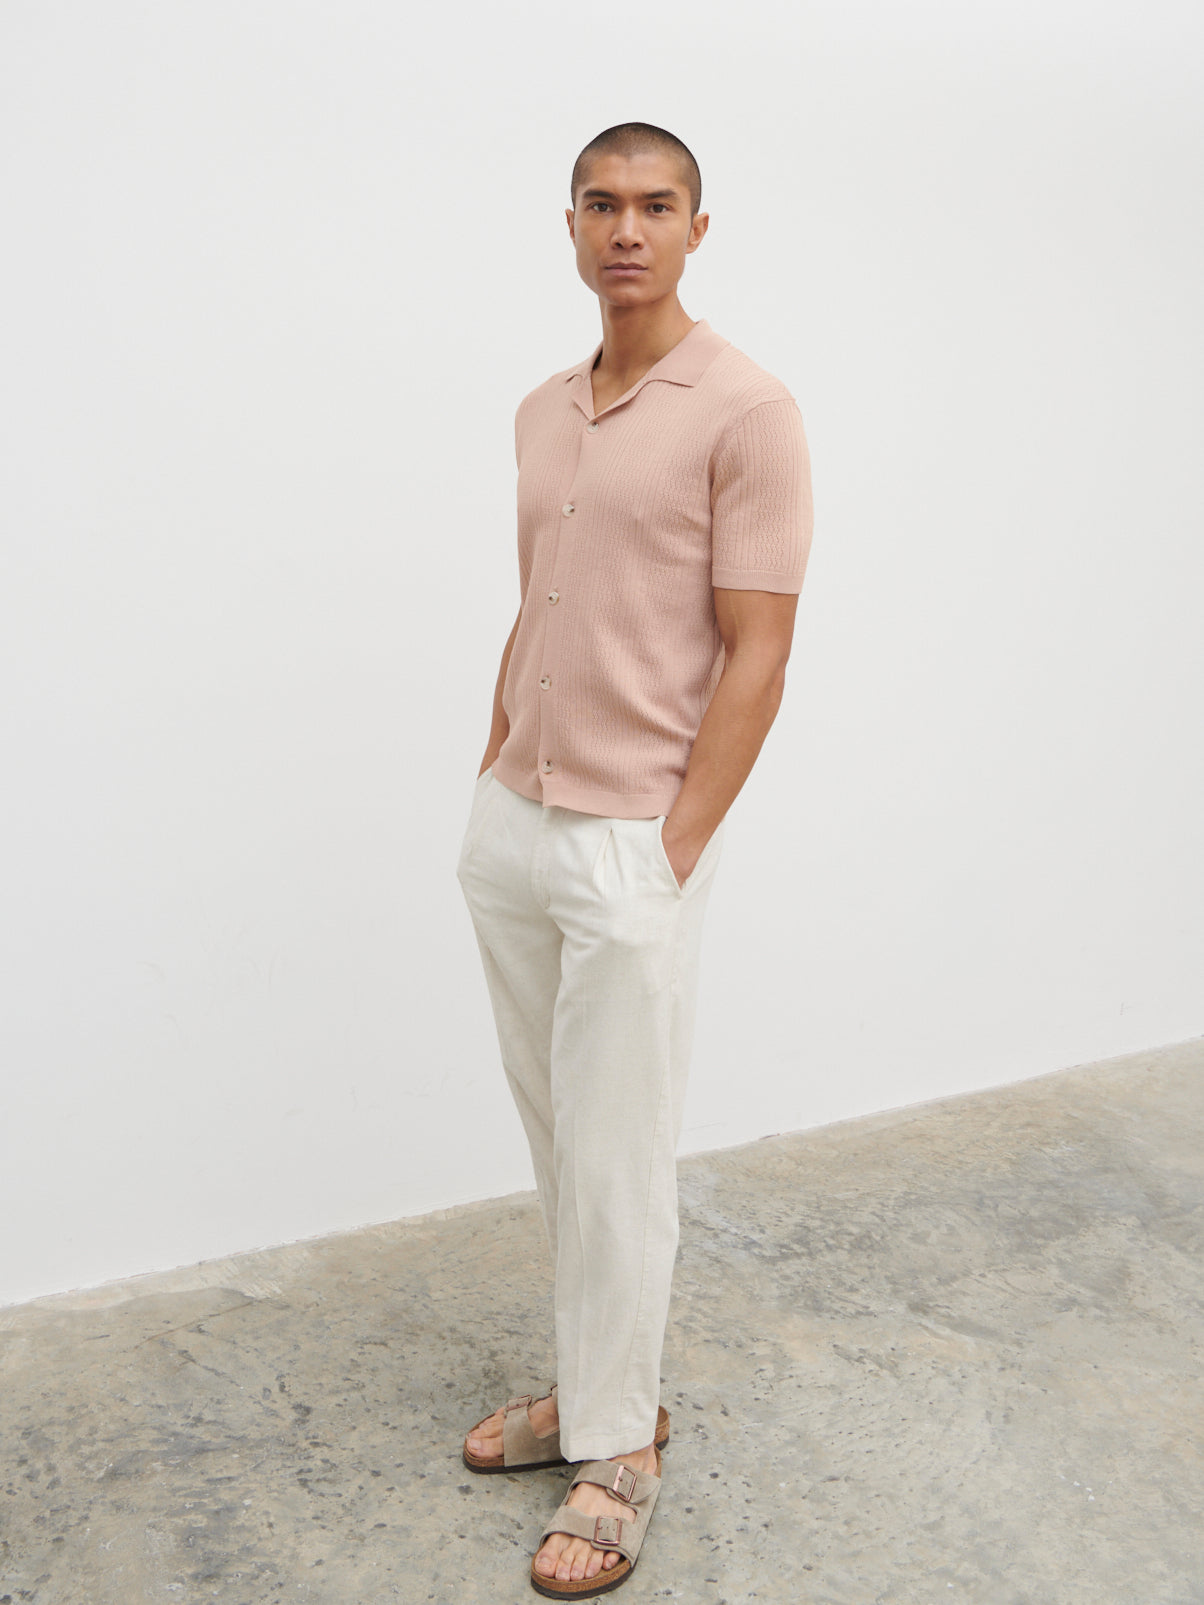 Theo Knit Shirt - Clay